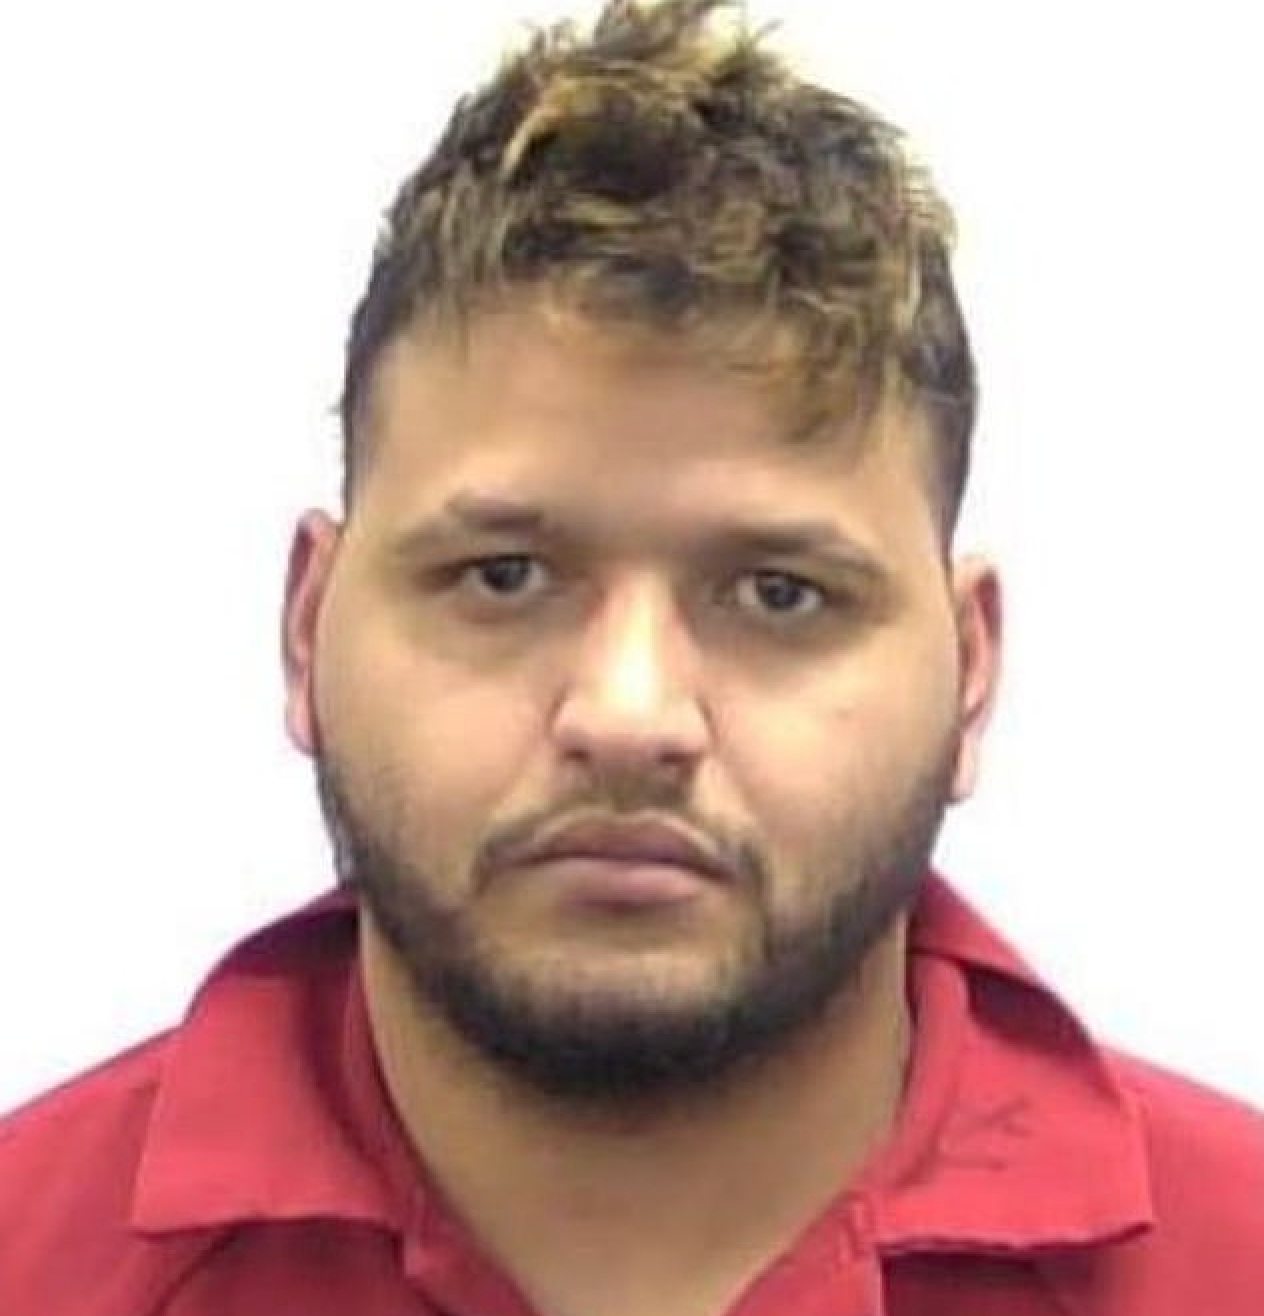 Jose Antonio Ibarra, 26, has been charged with malice murder and felony murder in connection with the death of Laken Riley